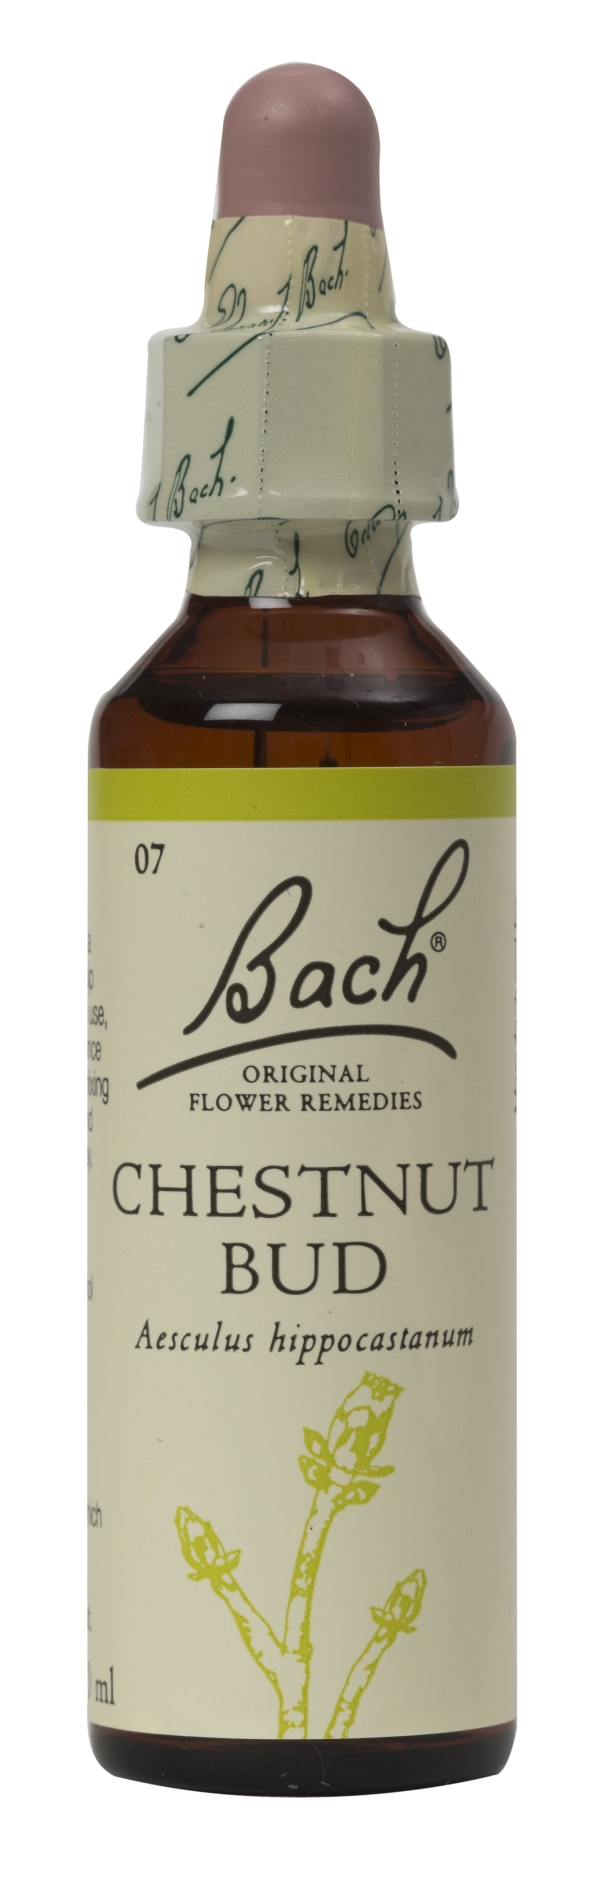 Nelson Bach Flower Remedies: Bach Chestnut Bud Flower Remedy (20ml) available online here